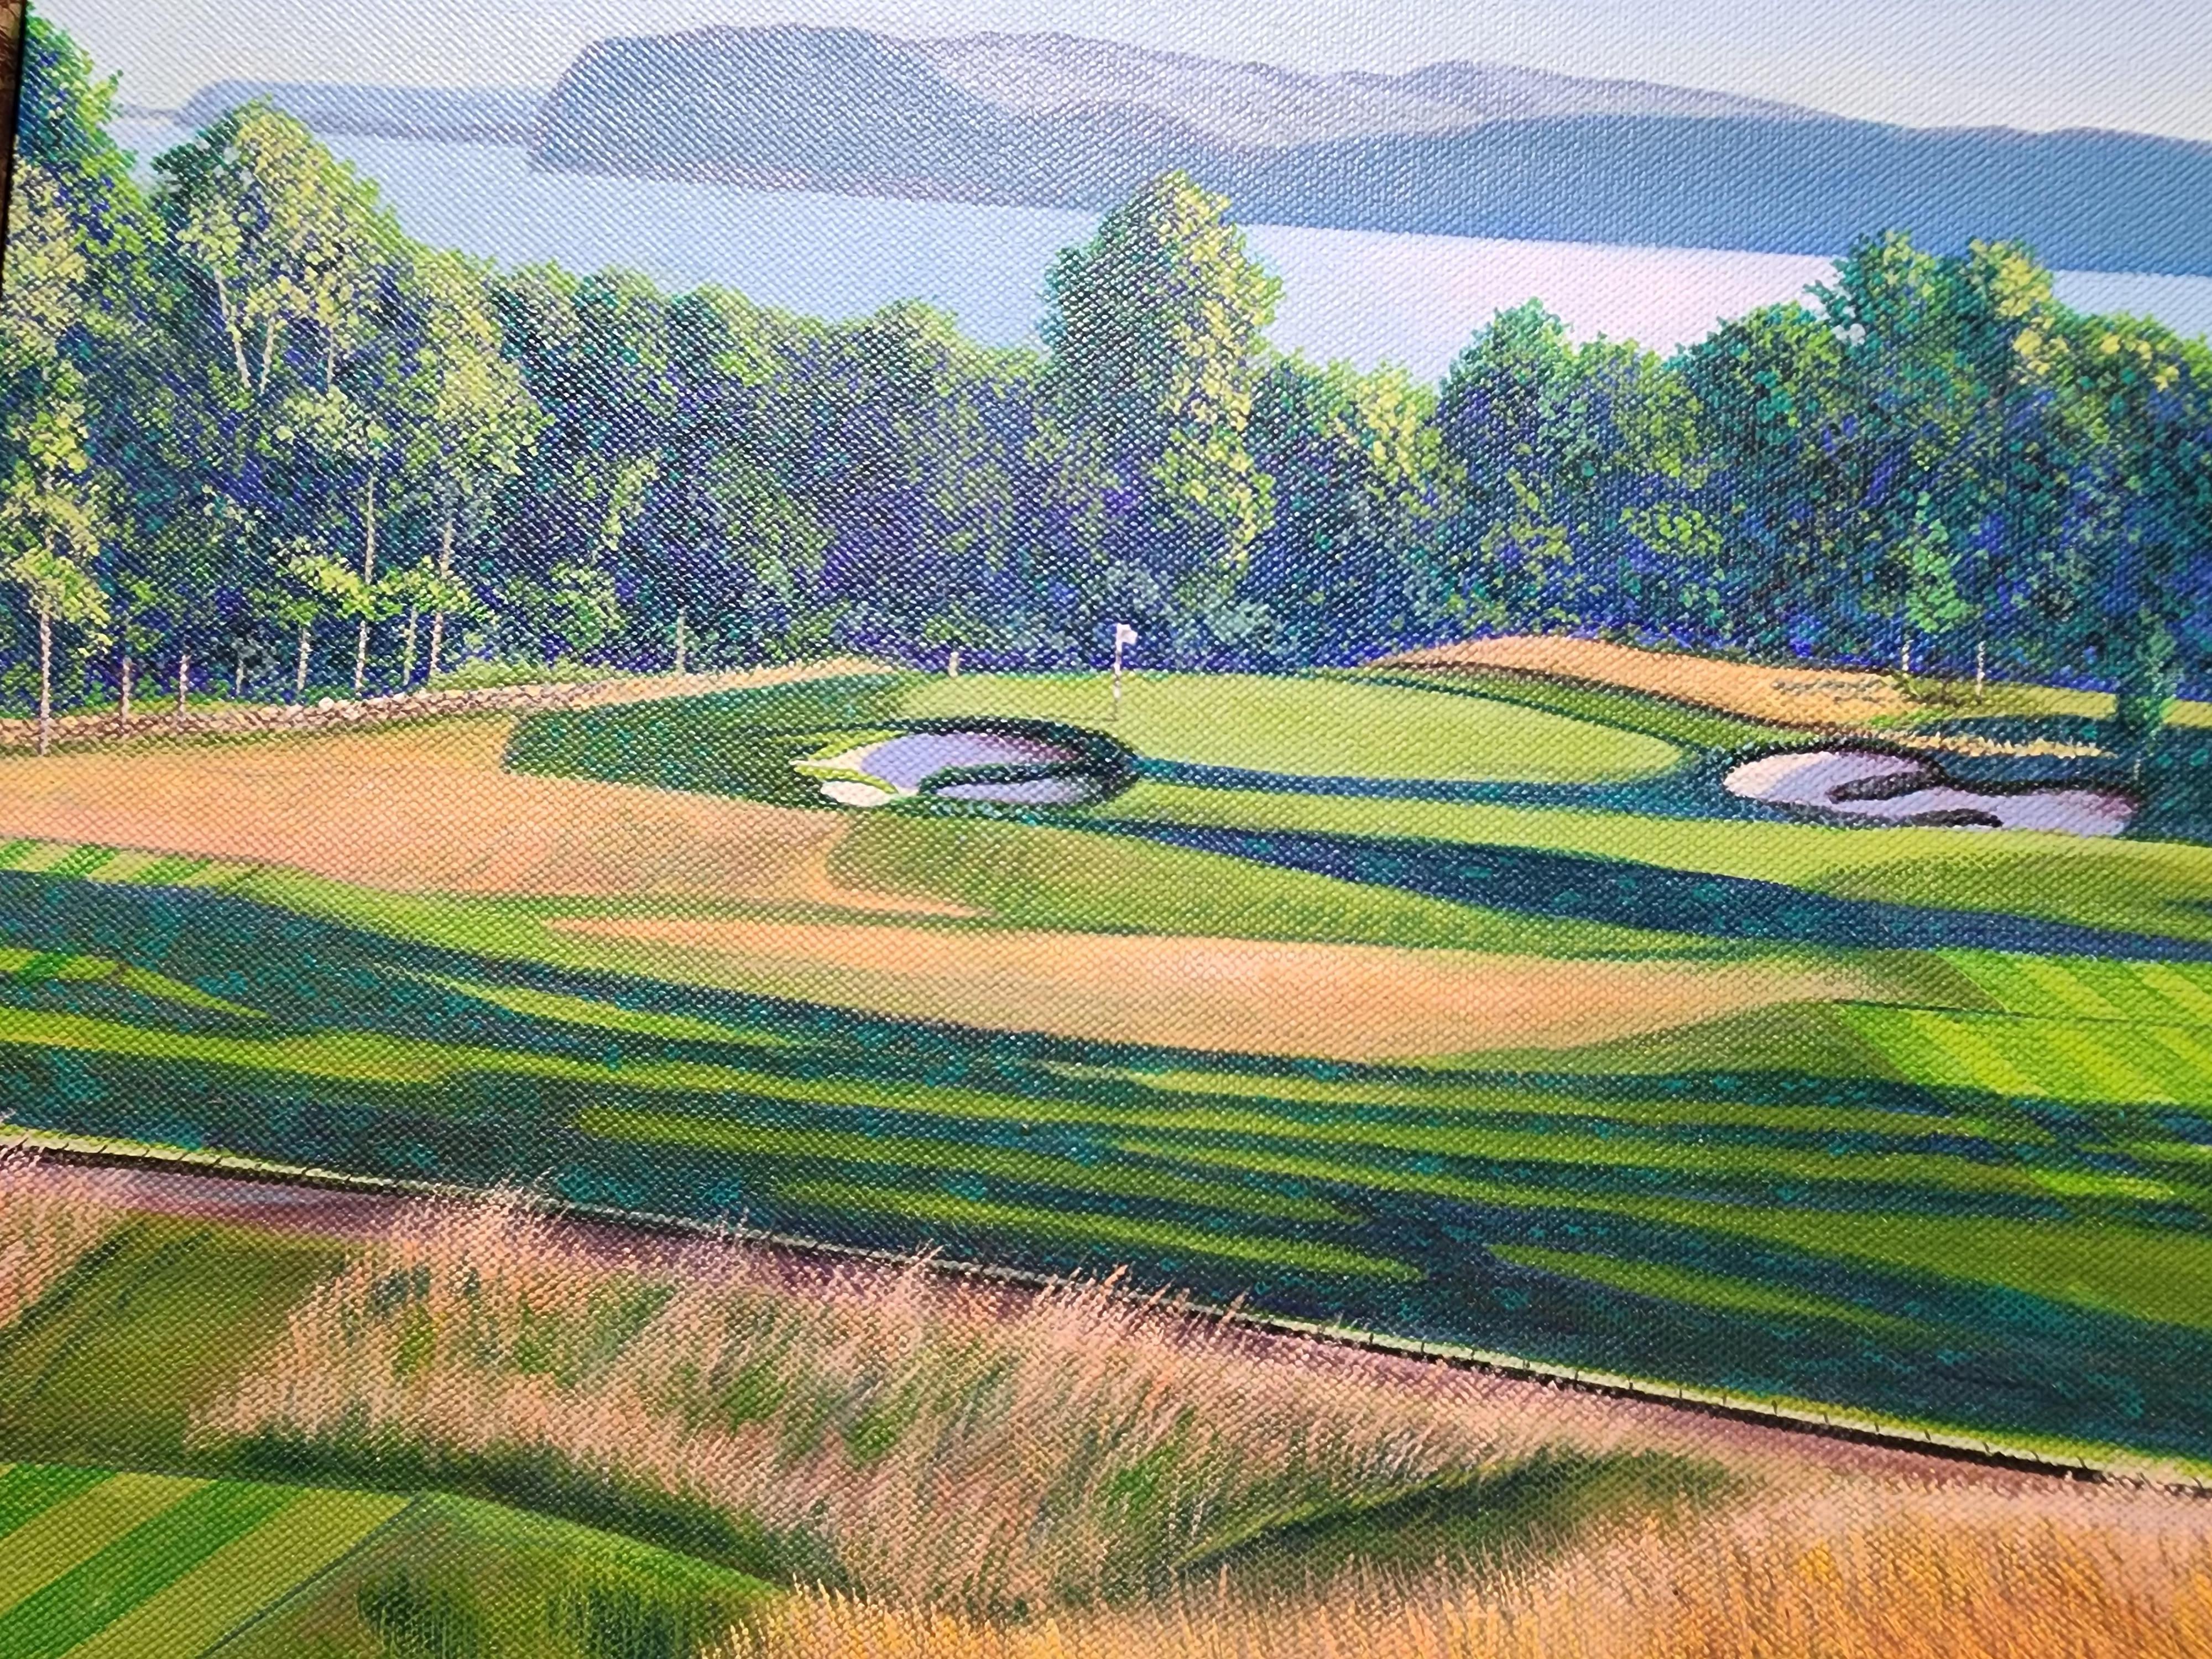 #16@ Croton on Hudson County Club - Brown Landscape Painting by Donald Moss